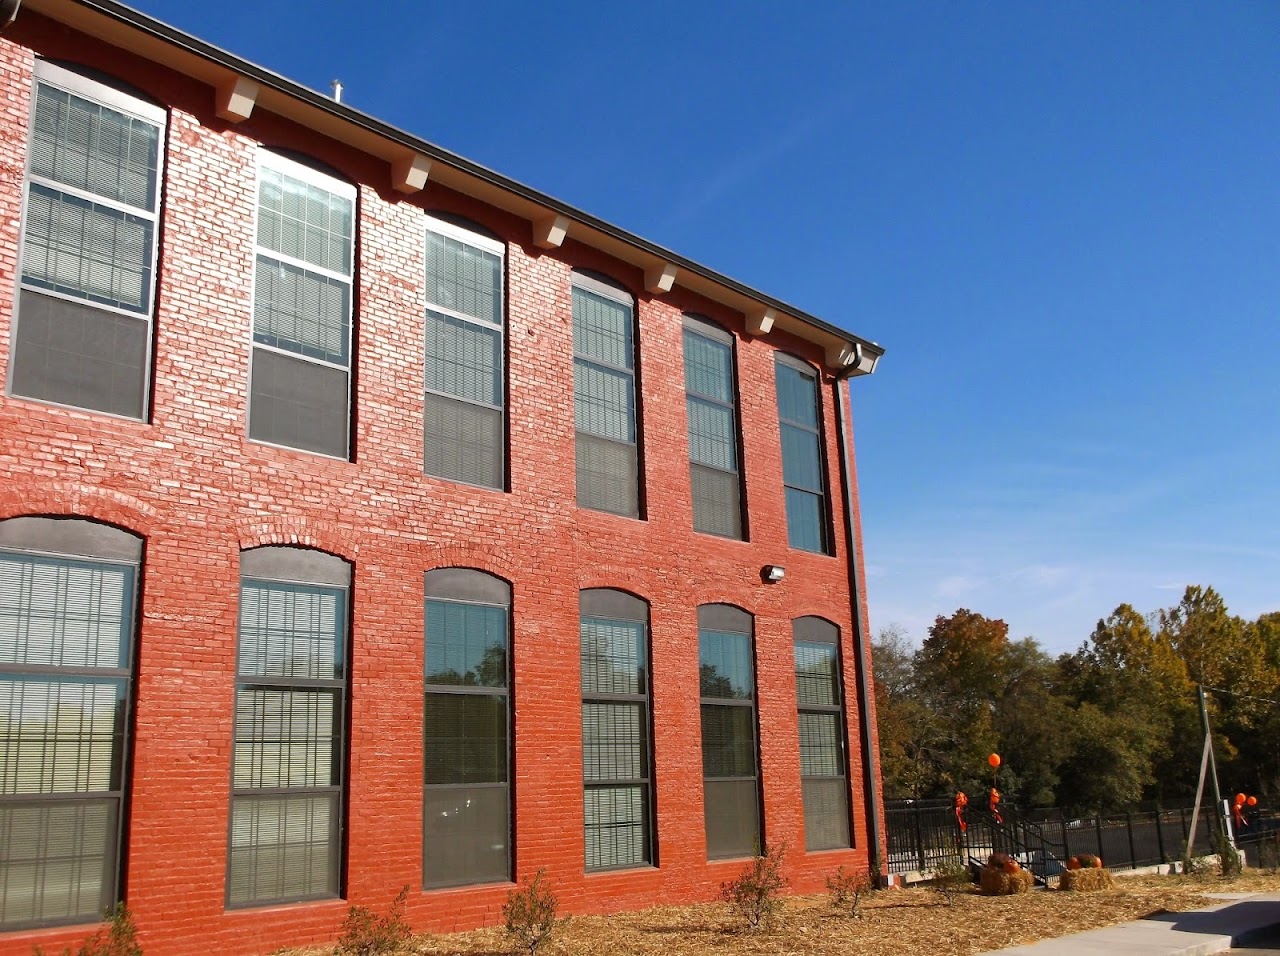 Photo of COTTON MILL LOFTS. Affordable housing located at 95 S HOUSTON ST HAWKINSVILLE, GA 31036